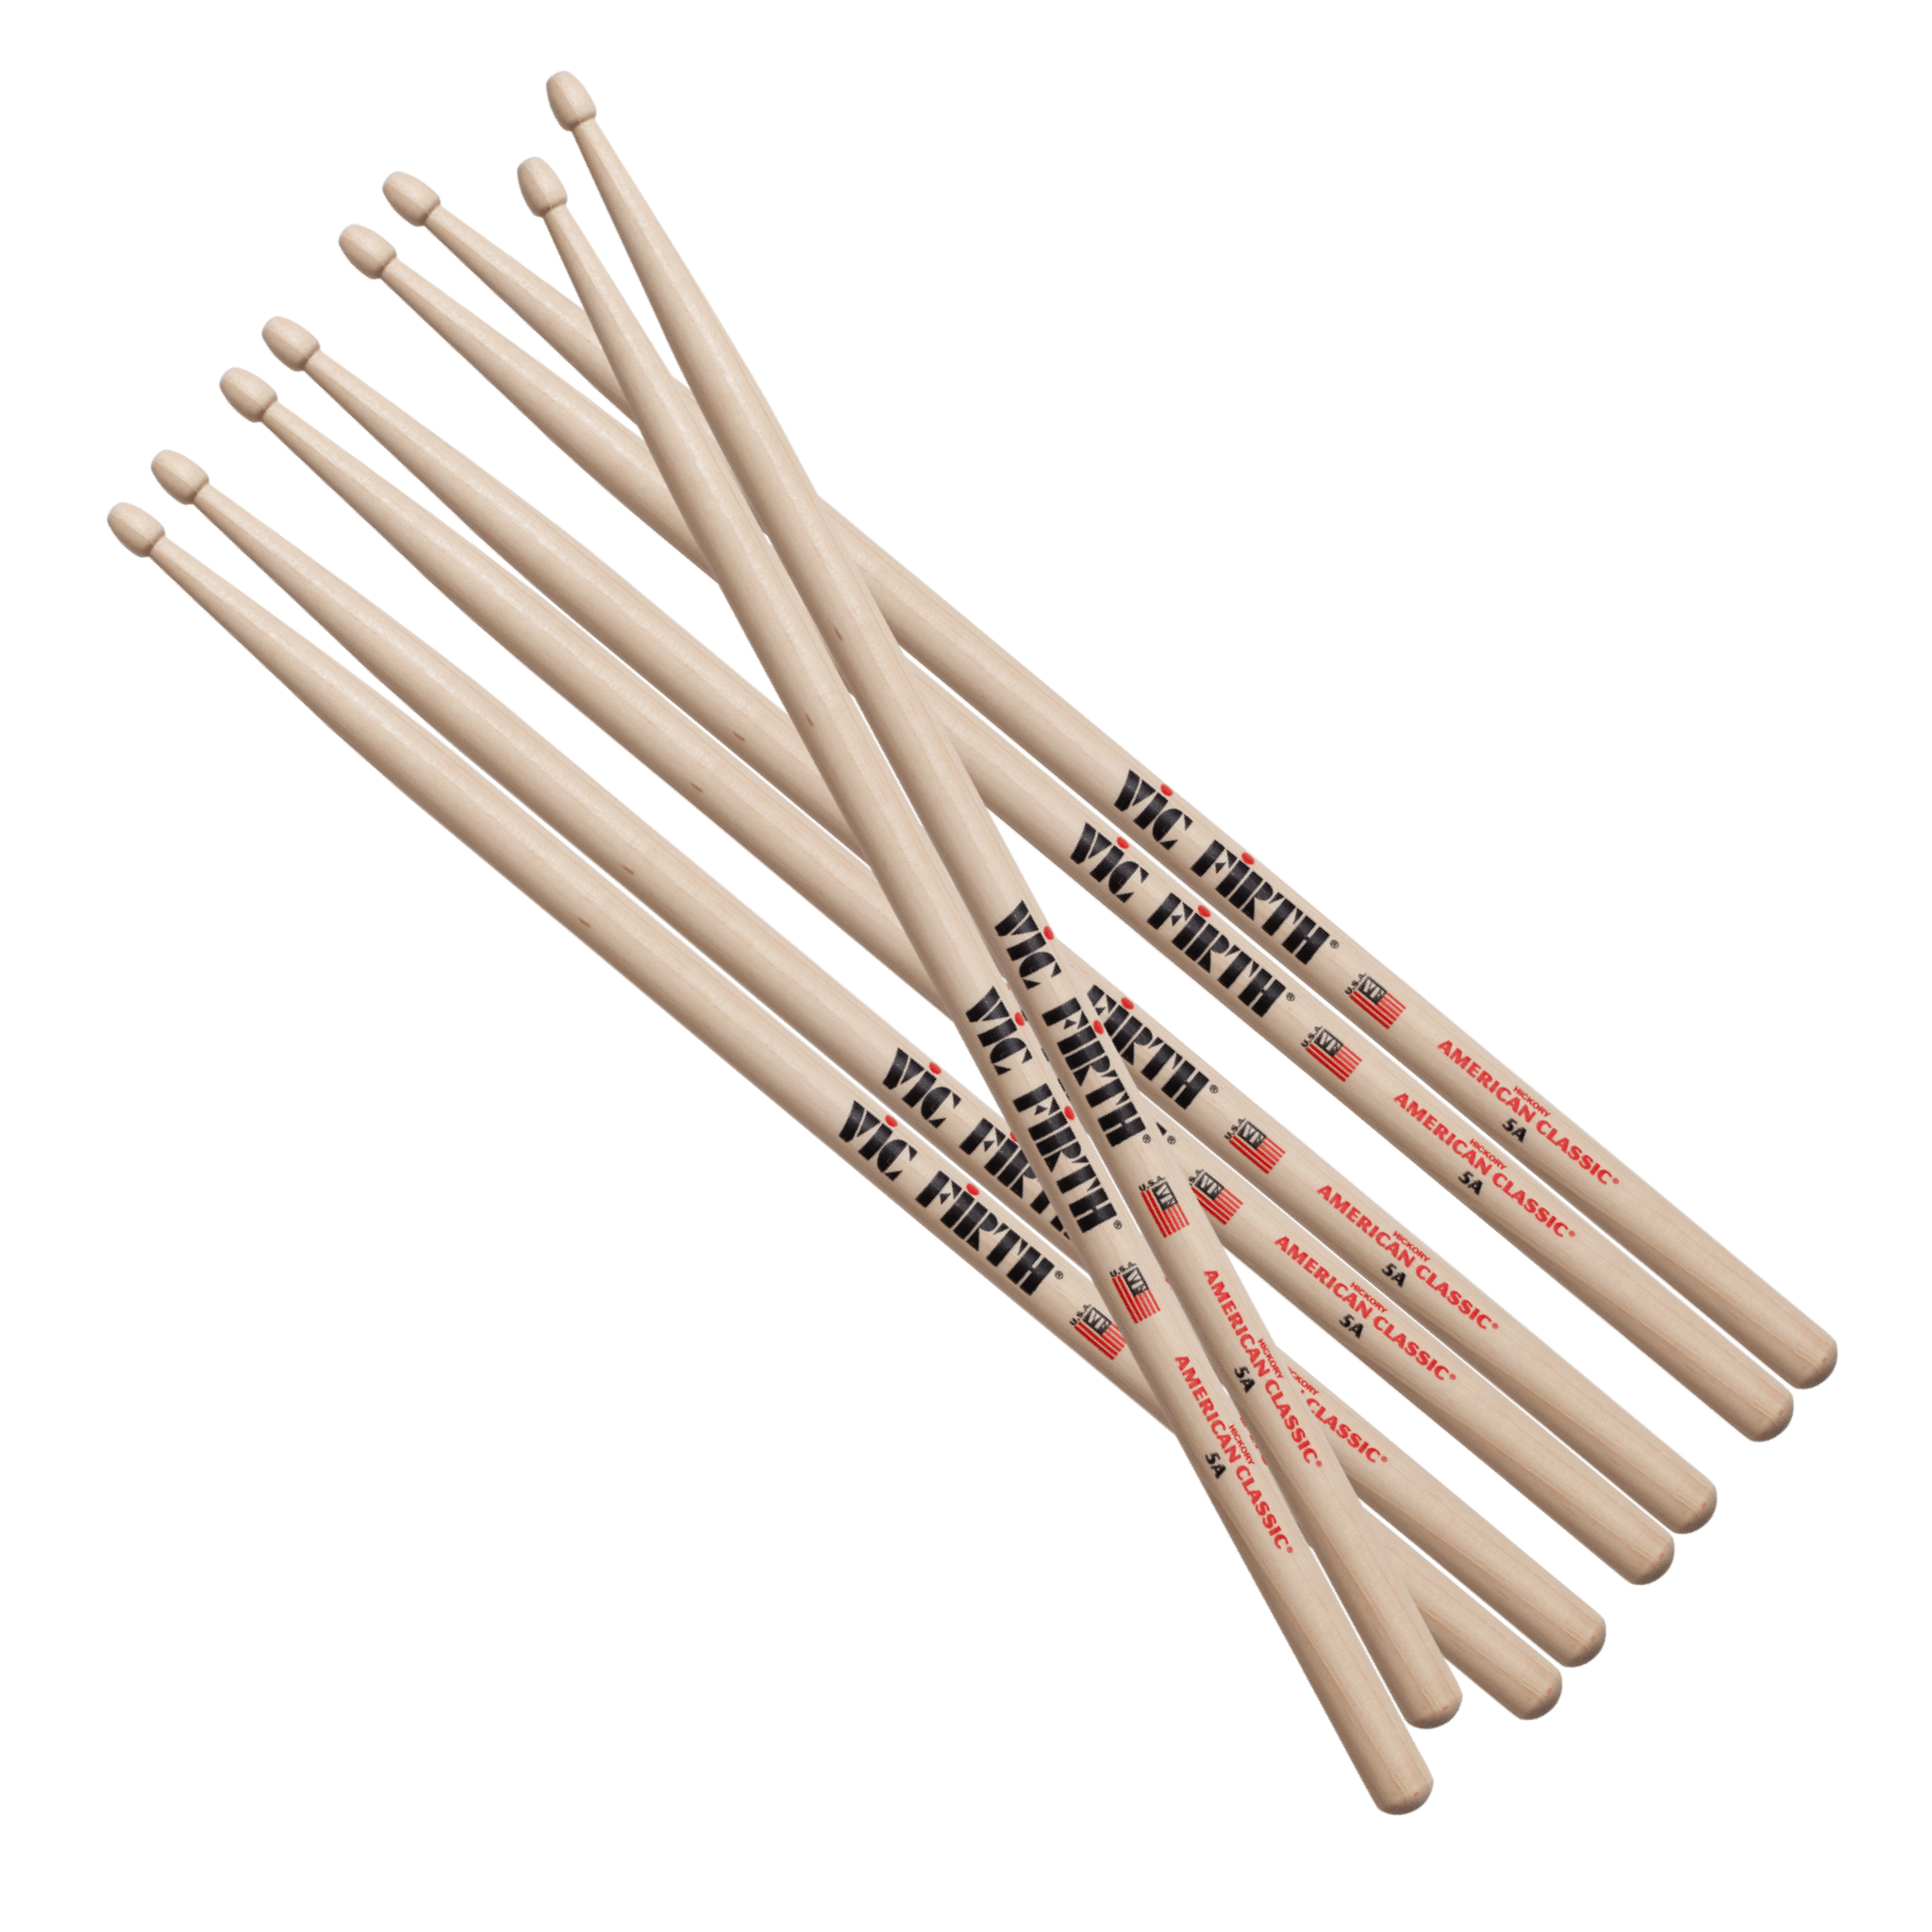 Vic Firth 5A American Hickory Value Pack